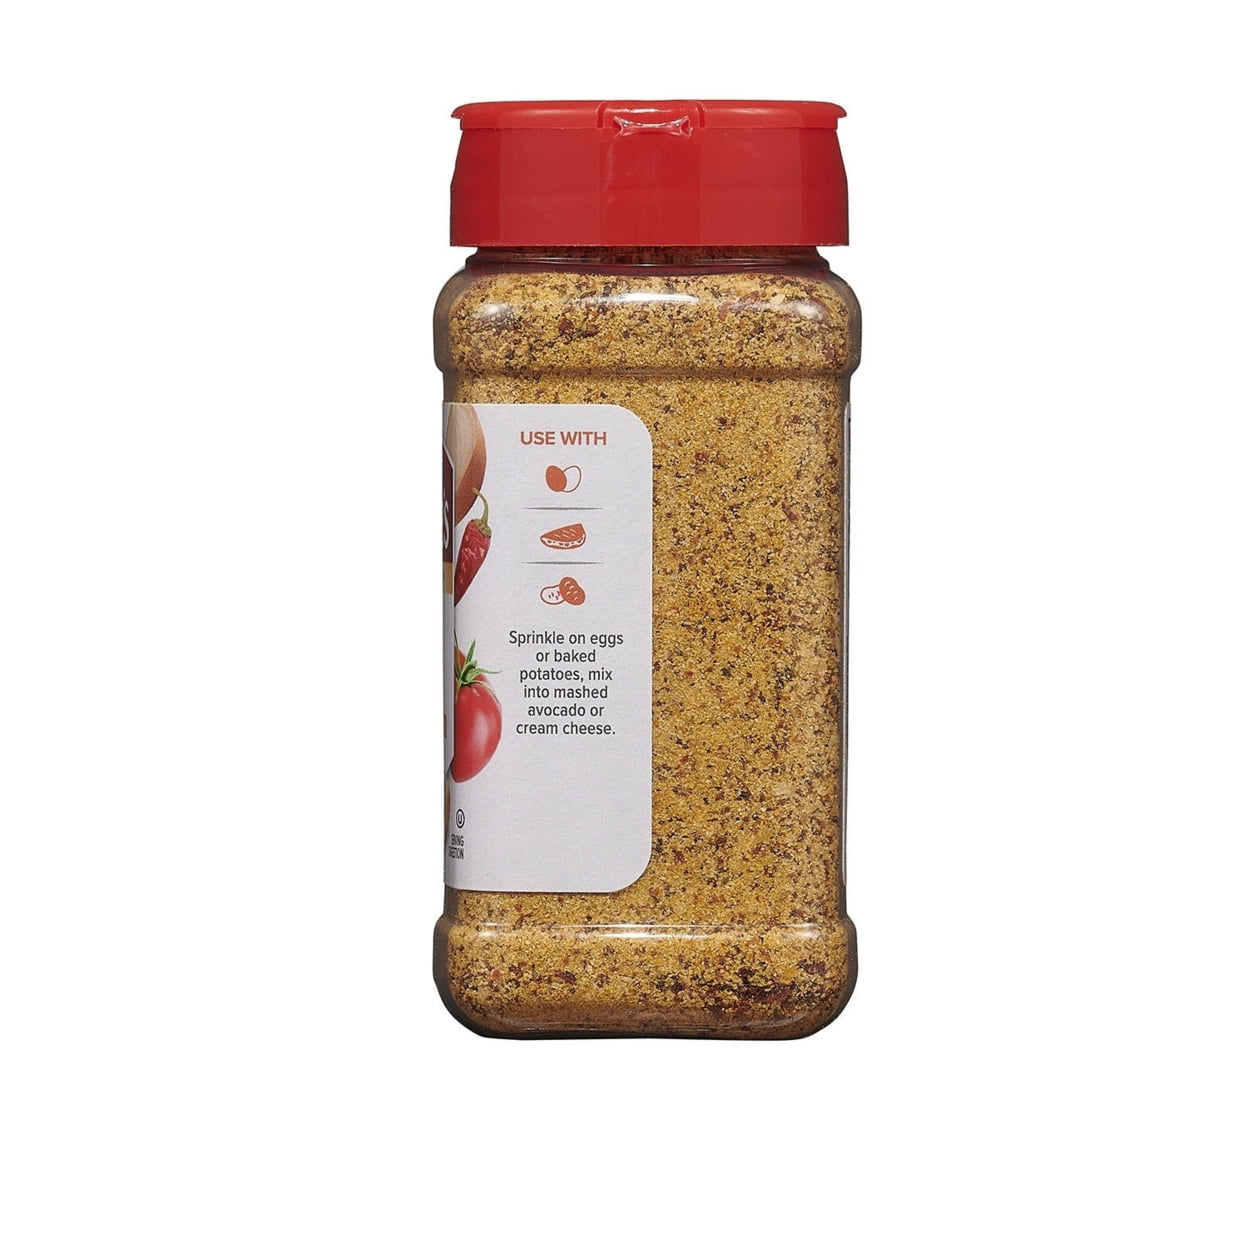 Tex-Mex Spice Mix – The Beader Chef